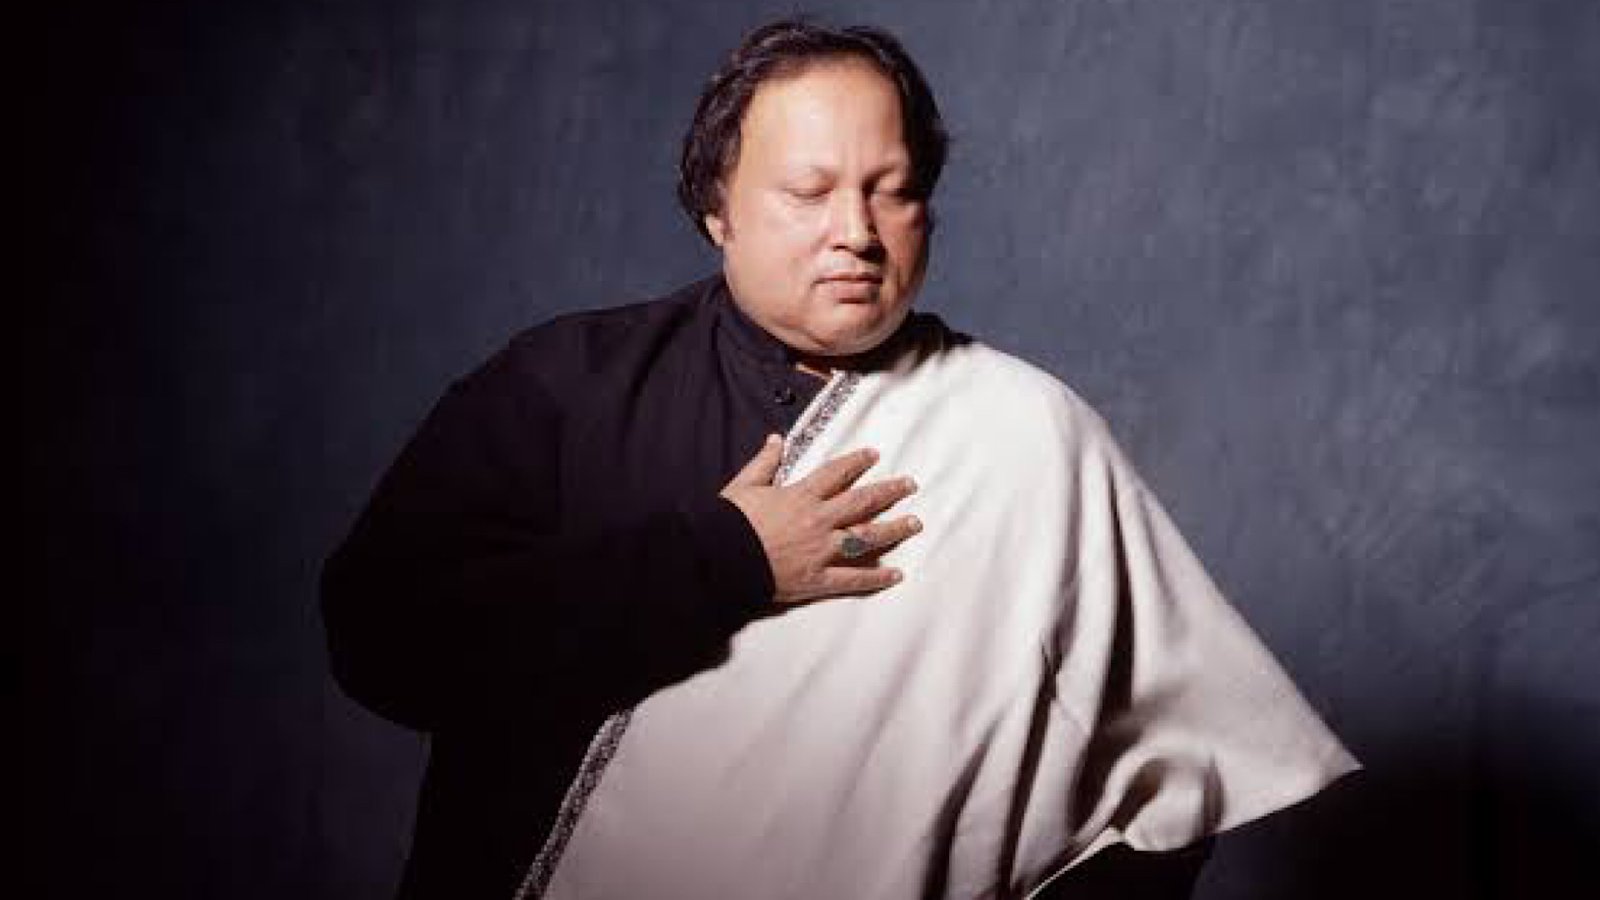 Nusrat Fateh Ali Khan’s lost album to release after 34 years